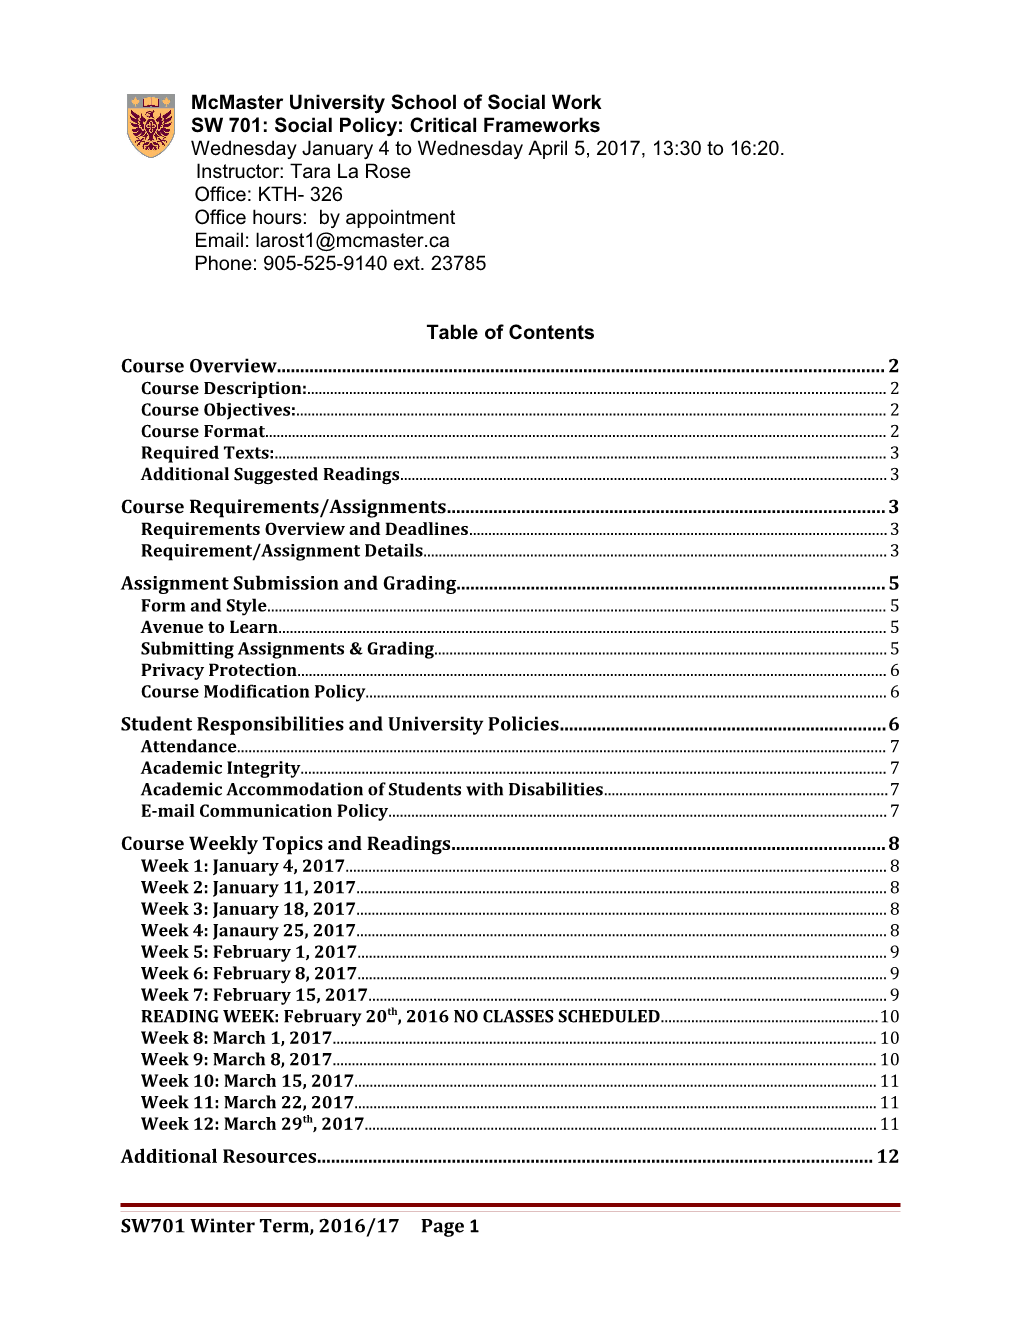 Accessible Course Outline Template s5